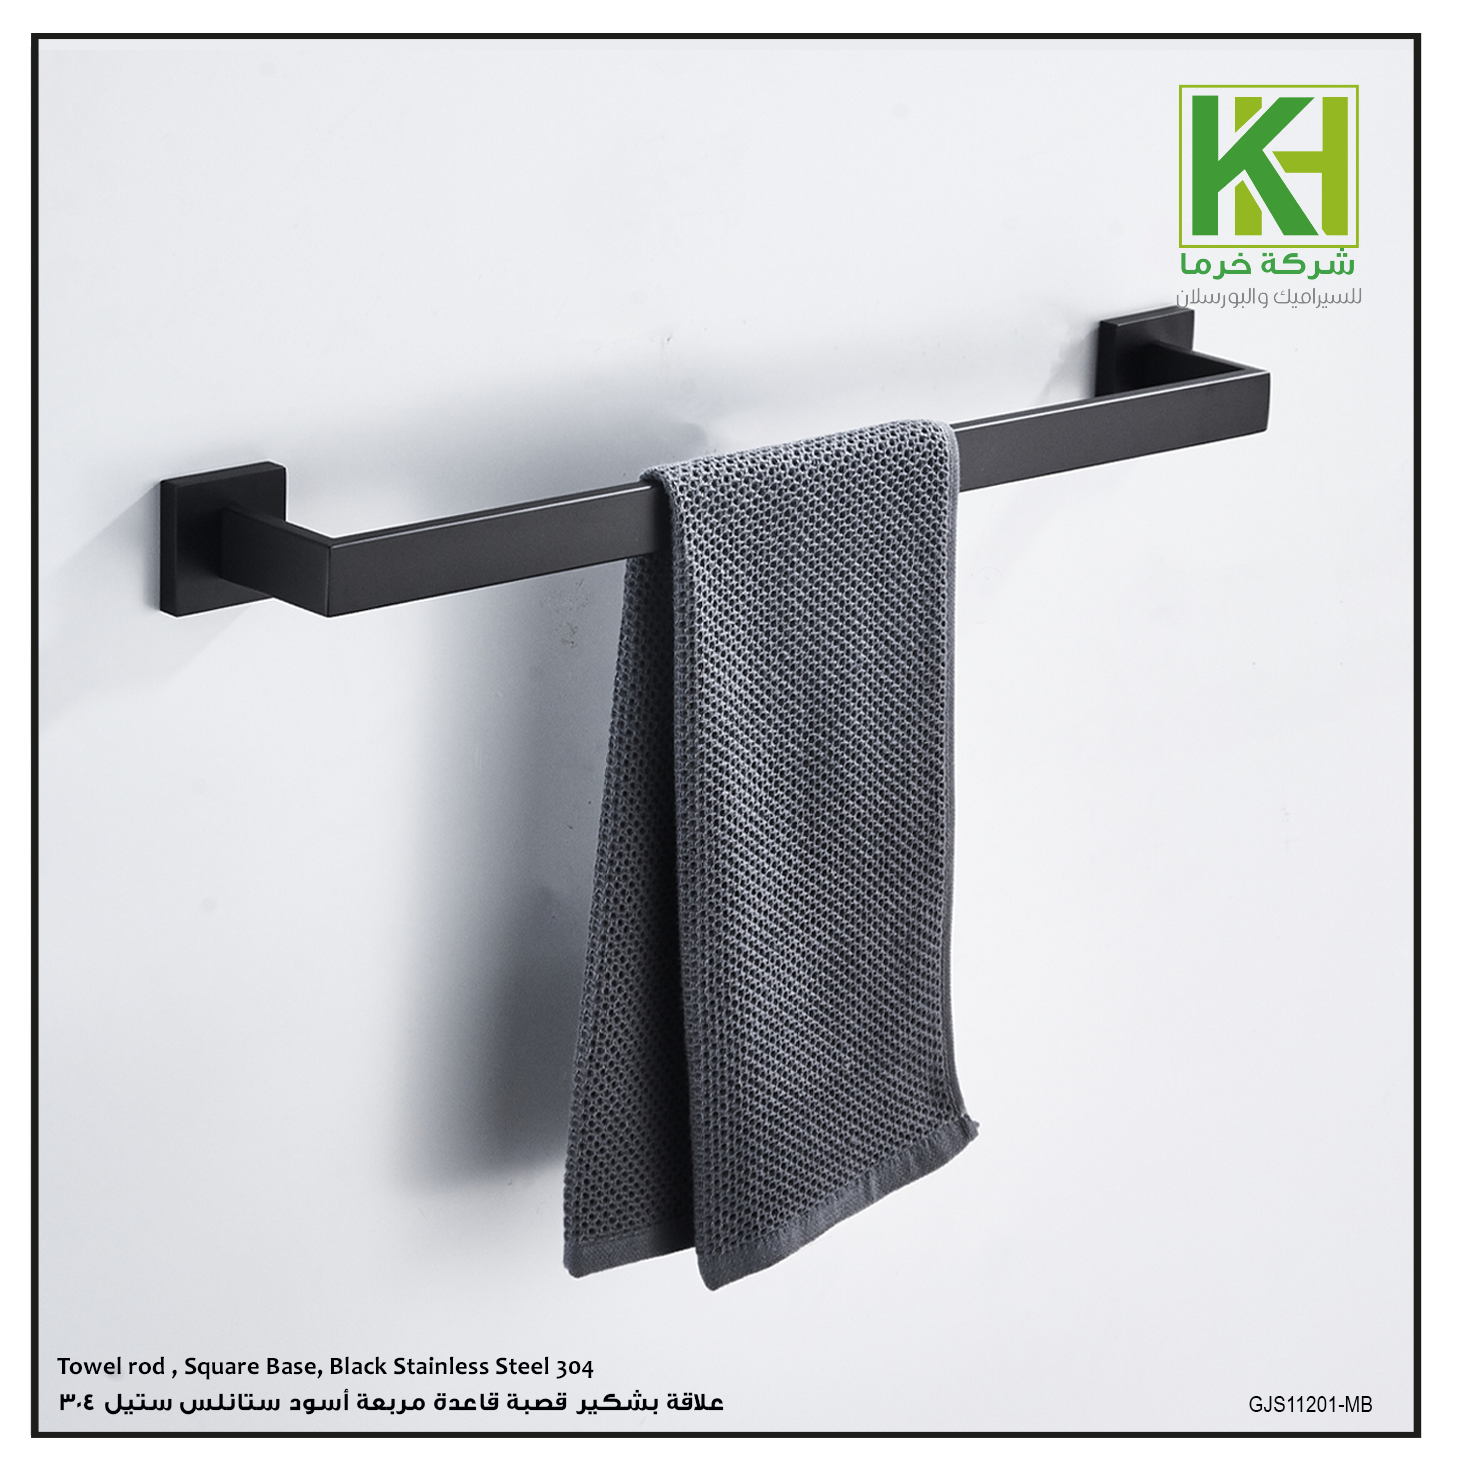 Picture of Towel rod , Square Base, Black Stainless Steel 304